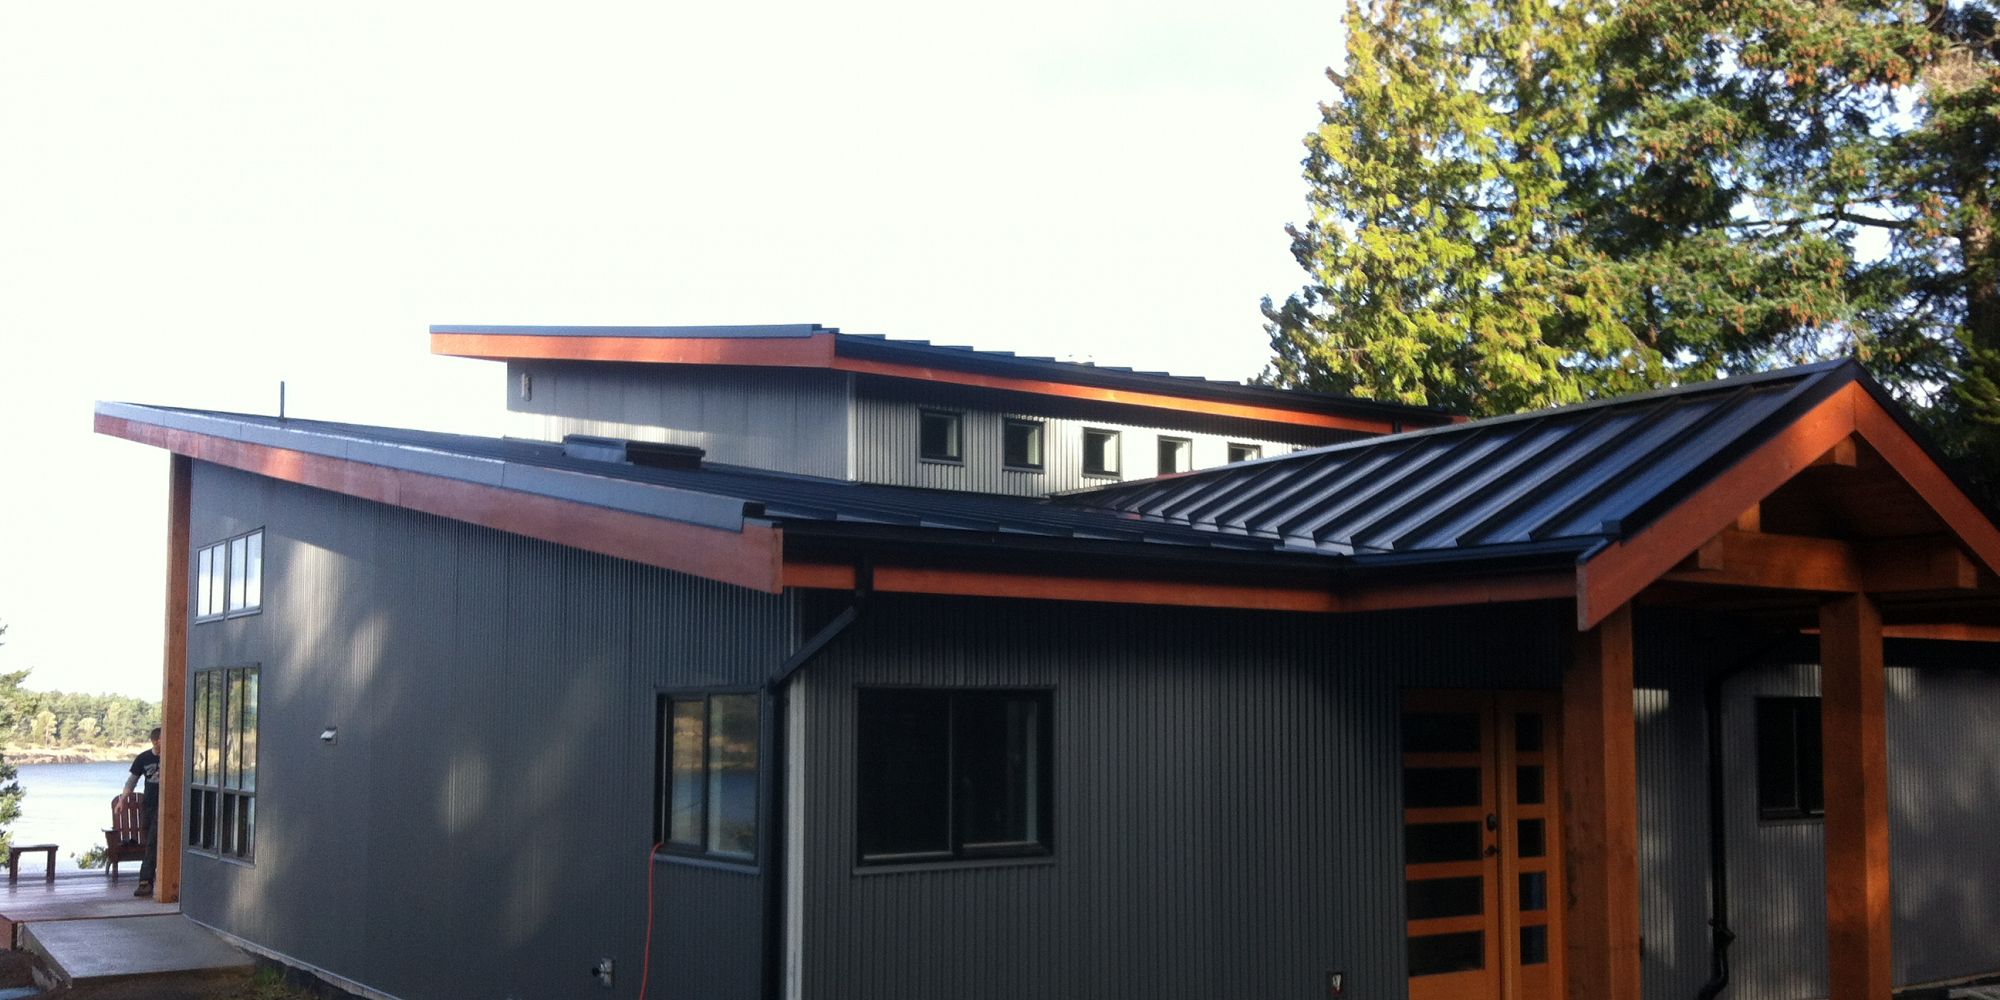 Residential metal siding and roofing